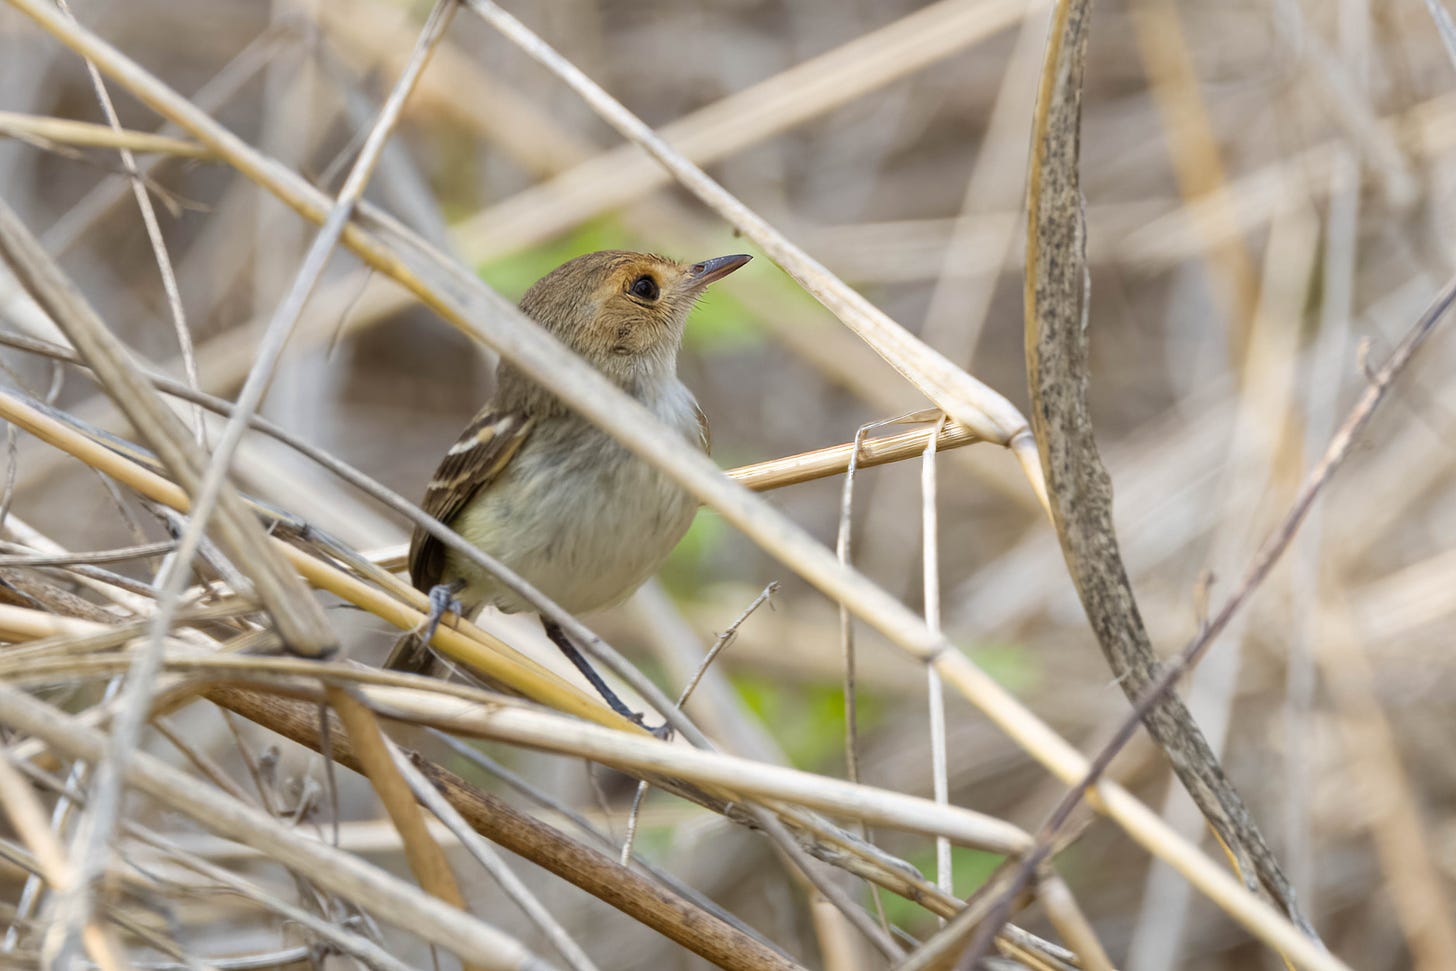 a small brown bird with darker brown, white-barred wings and an orange face, standing in a patch of dried brush, one piece of brush crossing from top left to bottom right in front of its neck. it is looking up and facing right.